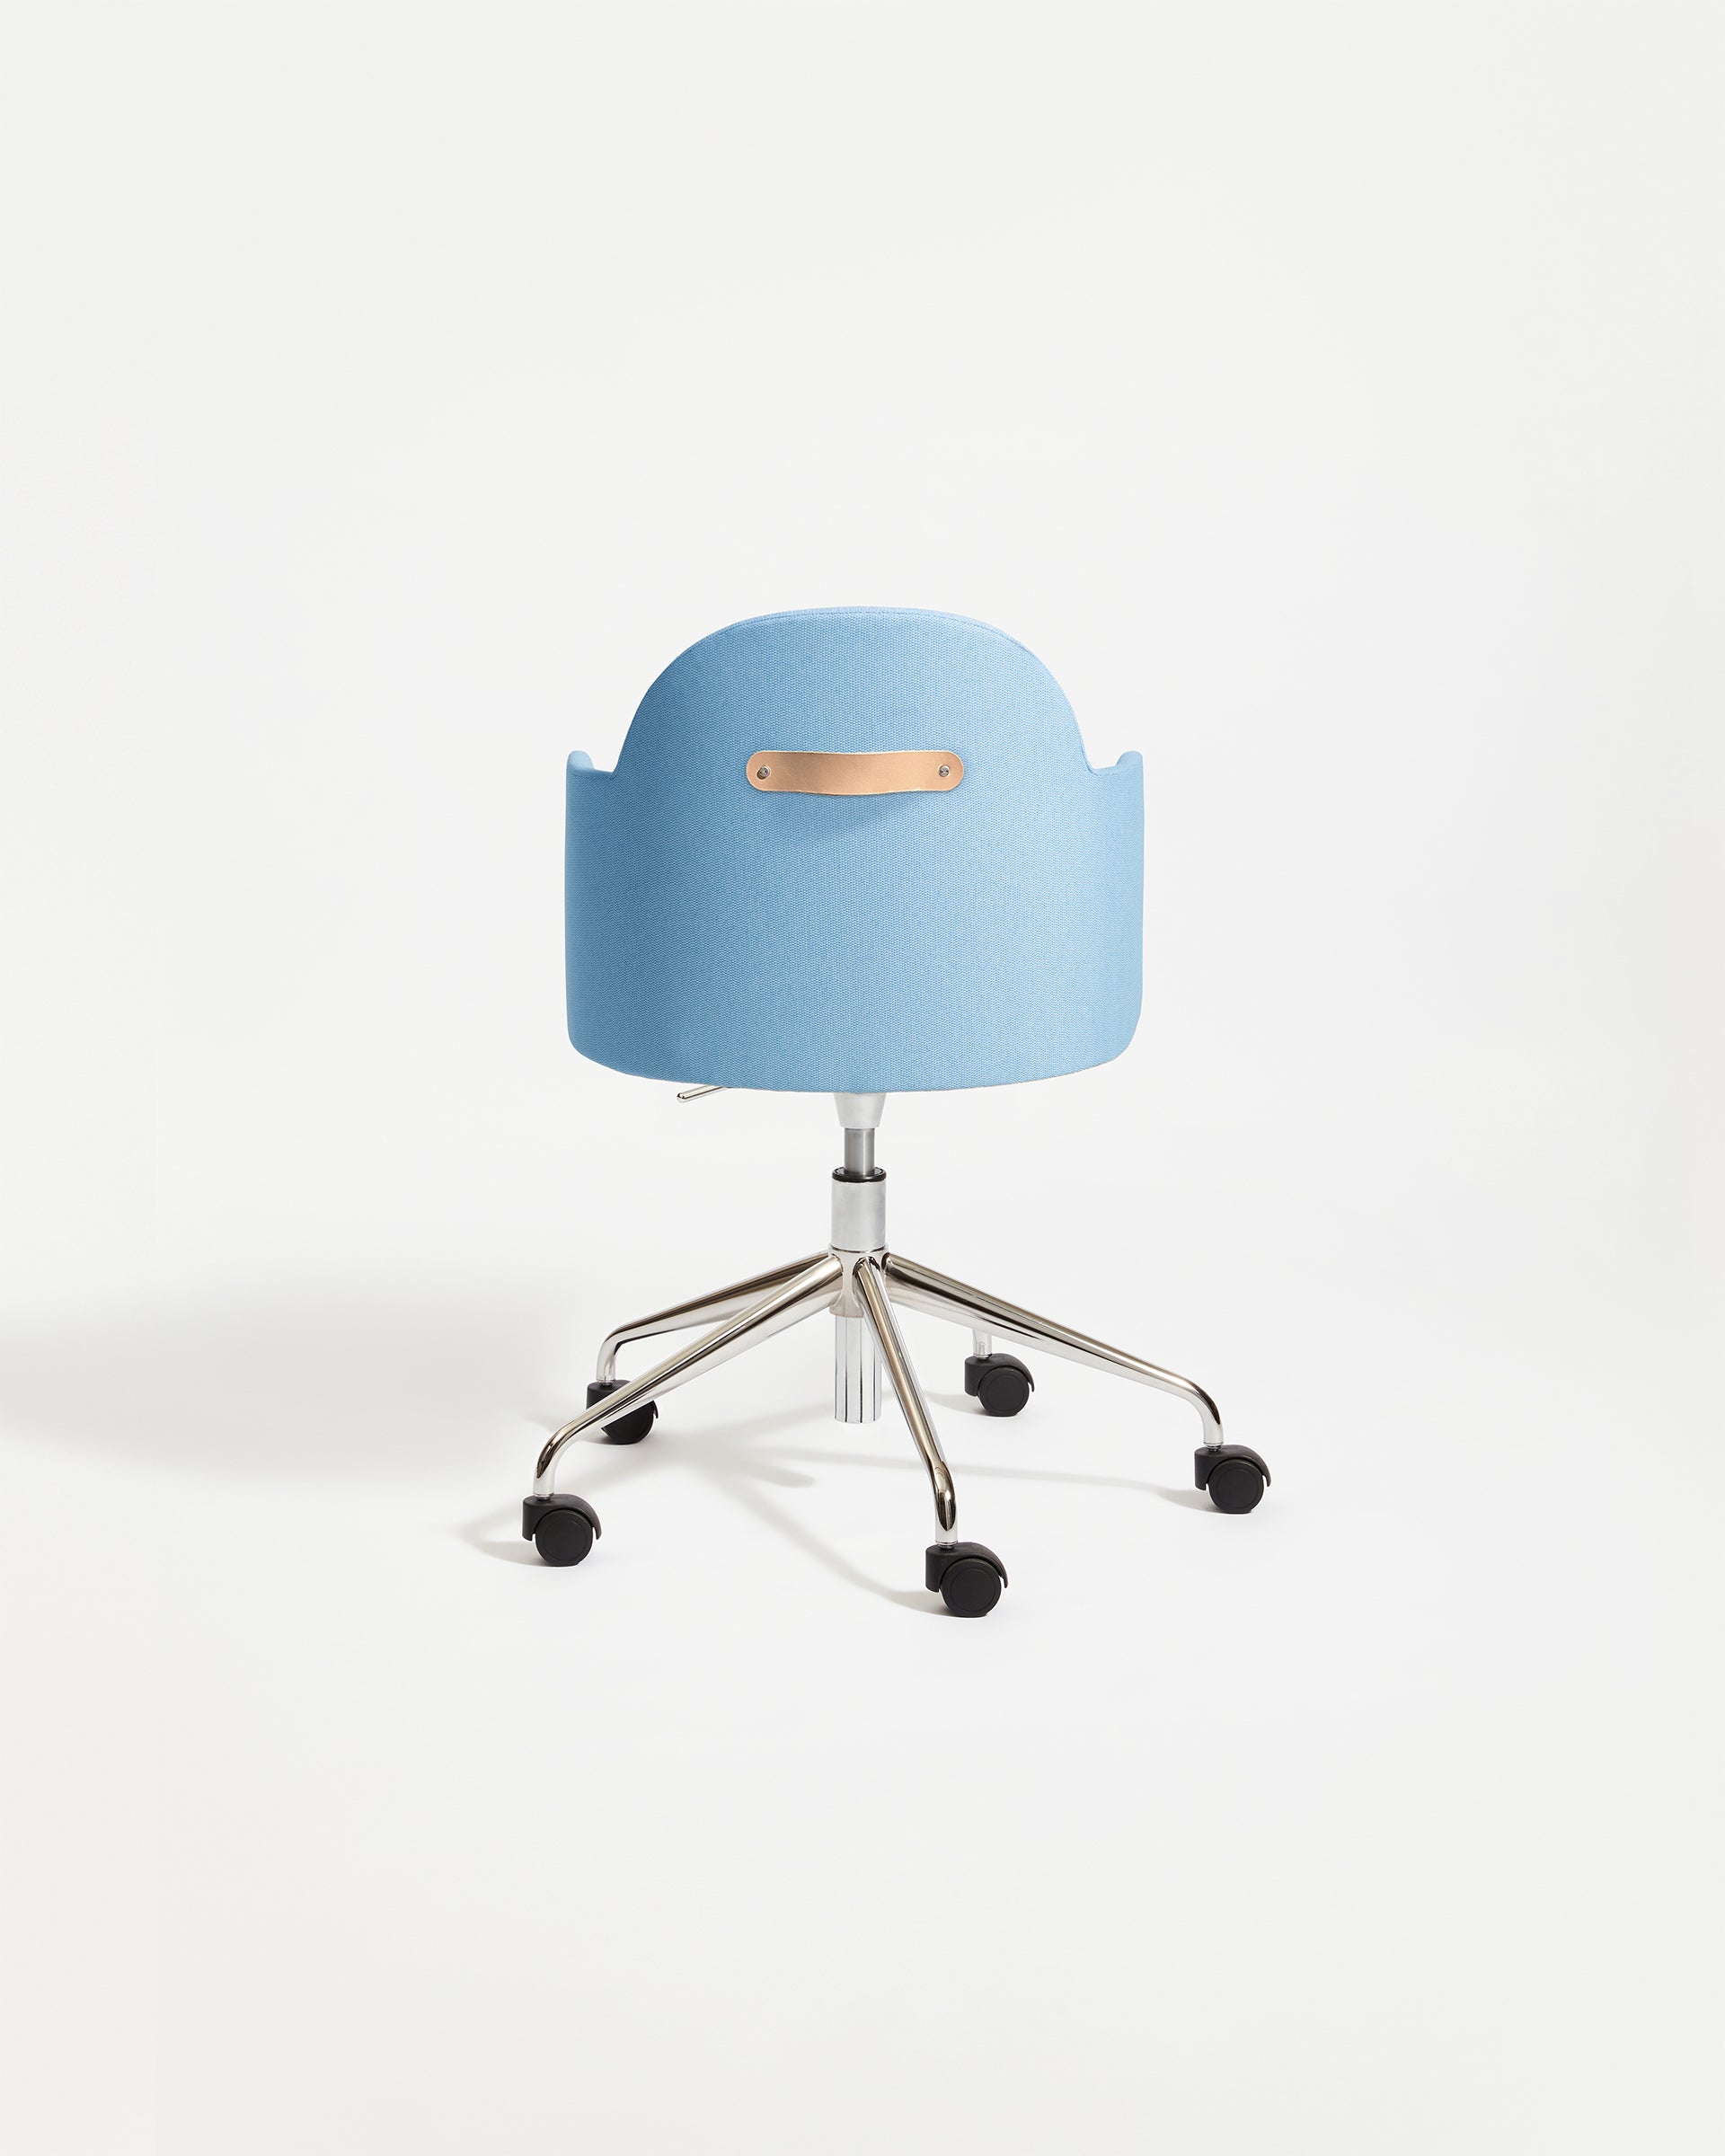 Potato Armchair Swivel Gaslift with Castors Chrome Base | Office or Dining Tub Chair with Handle | Gibson Karlo | DesignByThem ** HF2 Messenger - 093 Gale